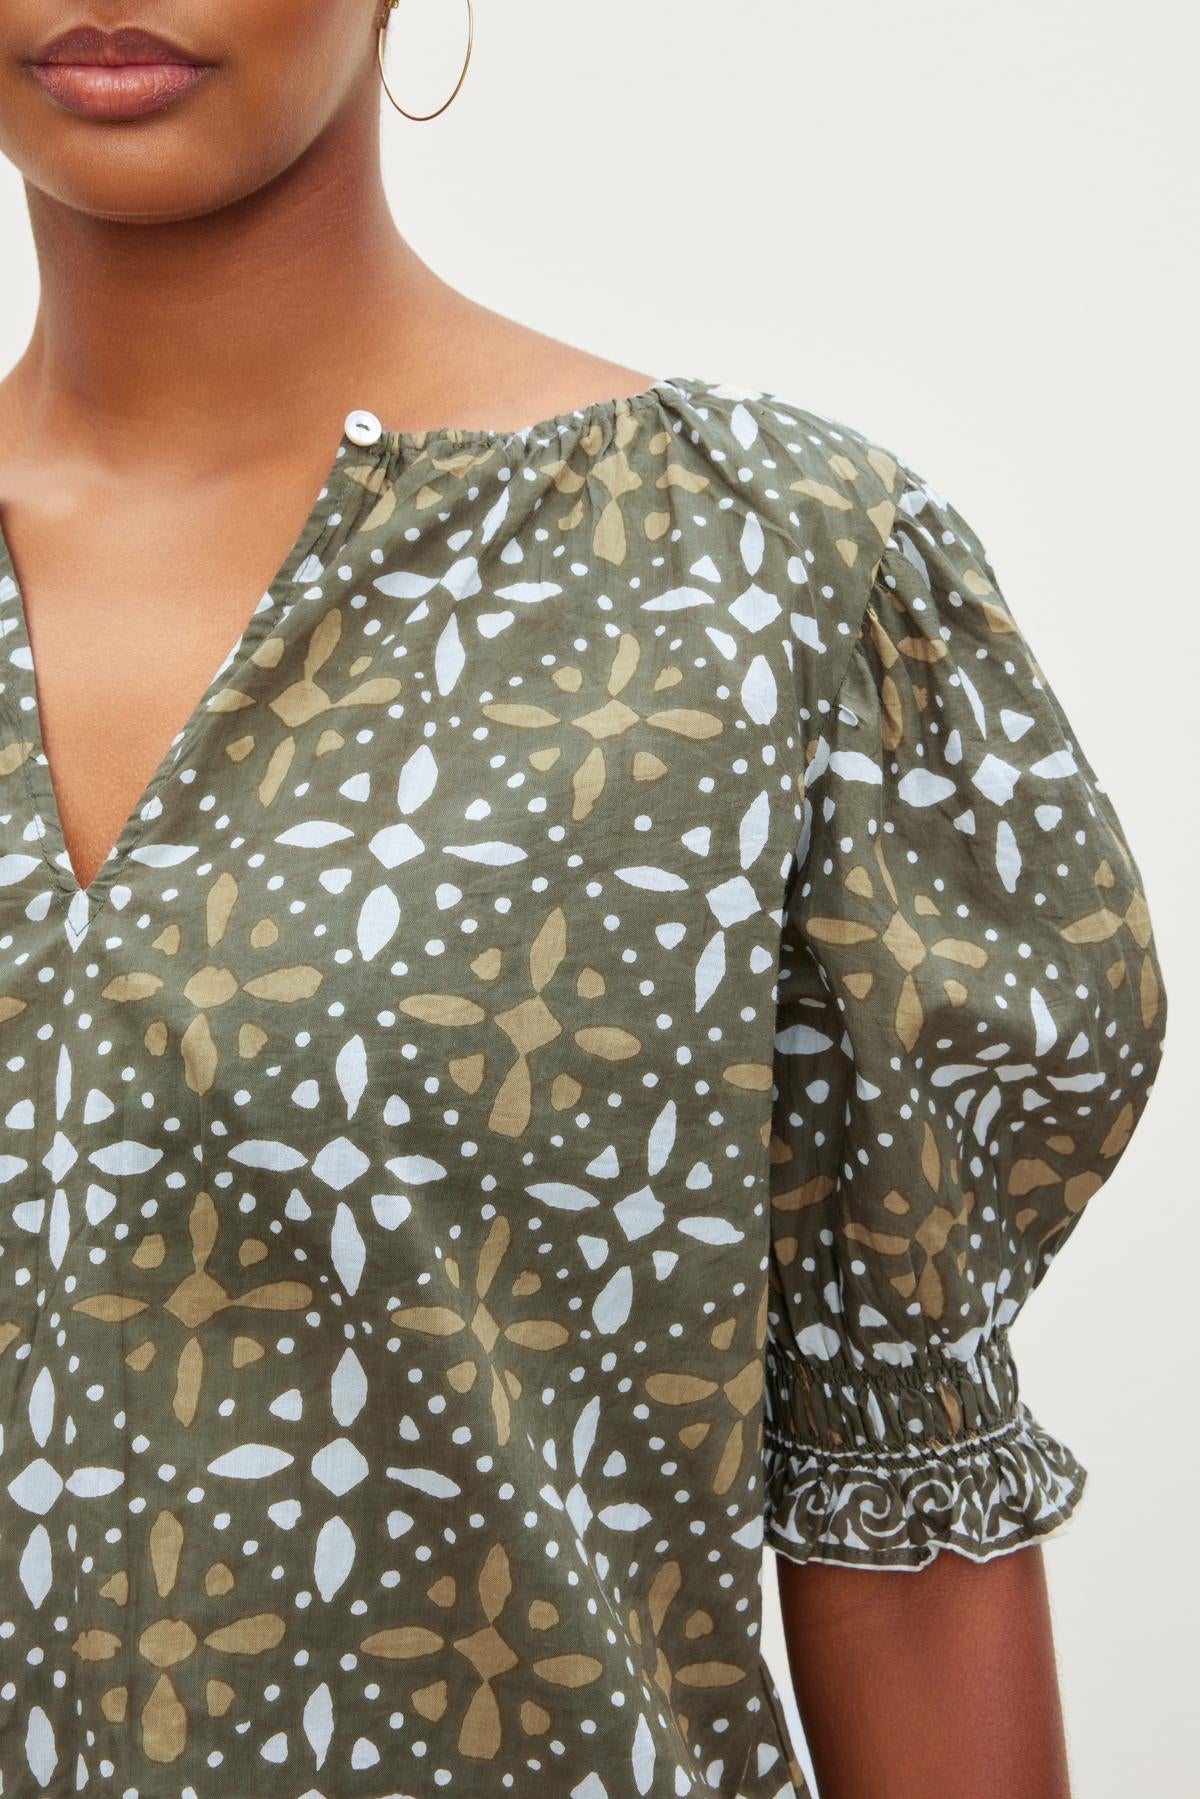 A woman wearing a Velvet by Graham & Spencer ALEX PRINTED BLOUSE with polka dots.-26799971696833